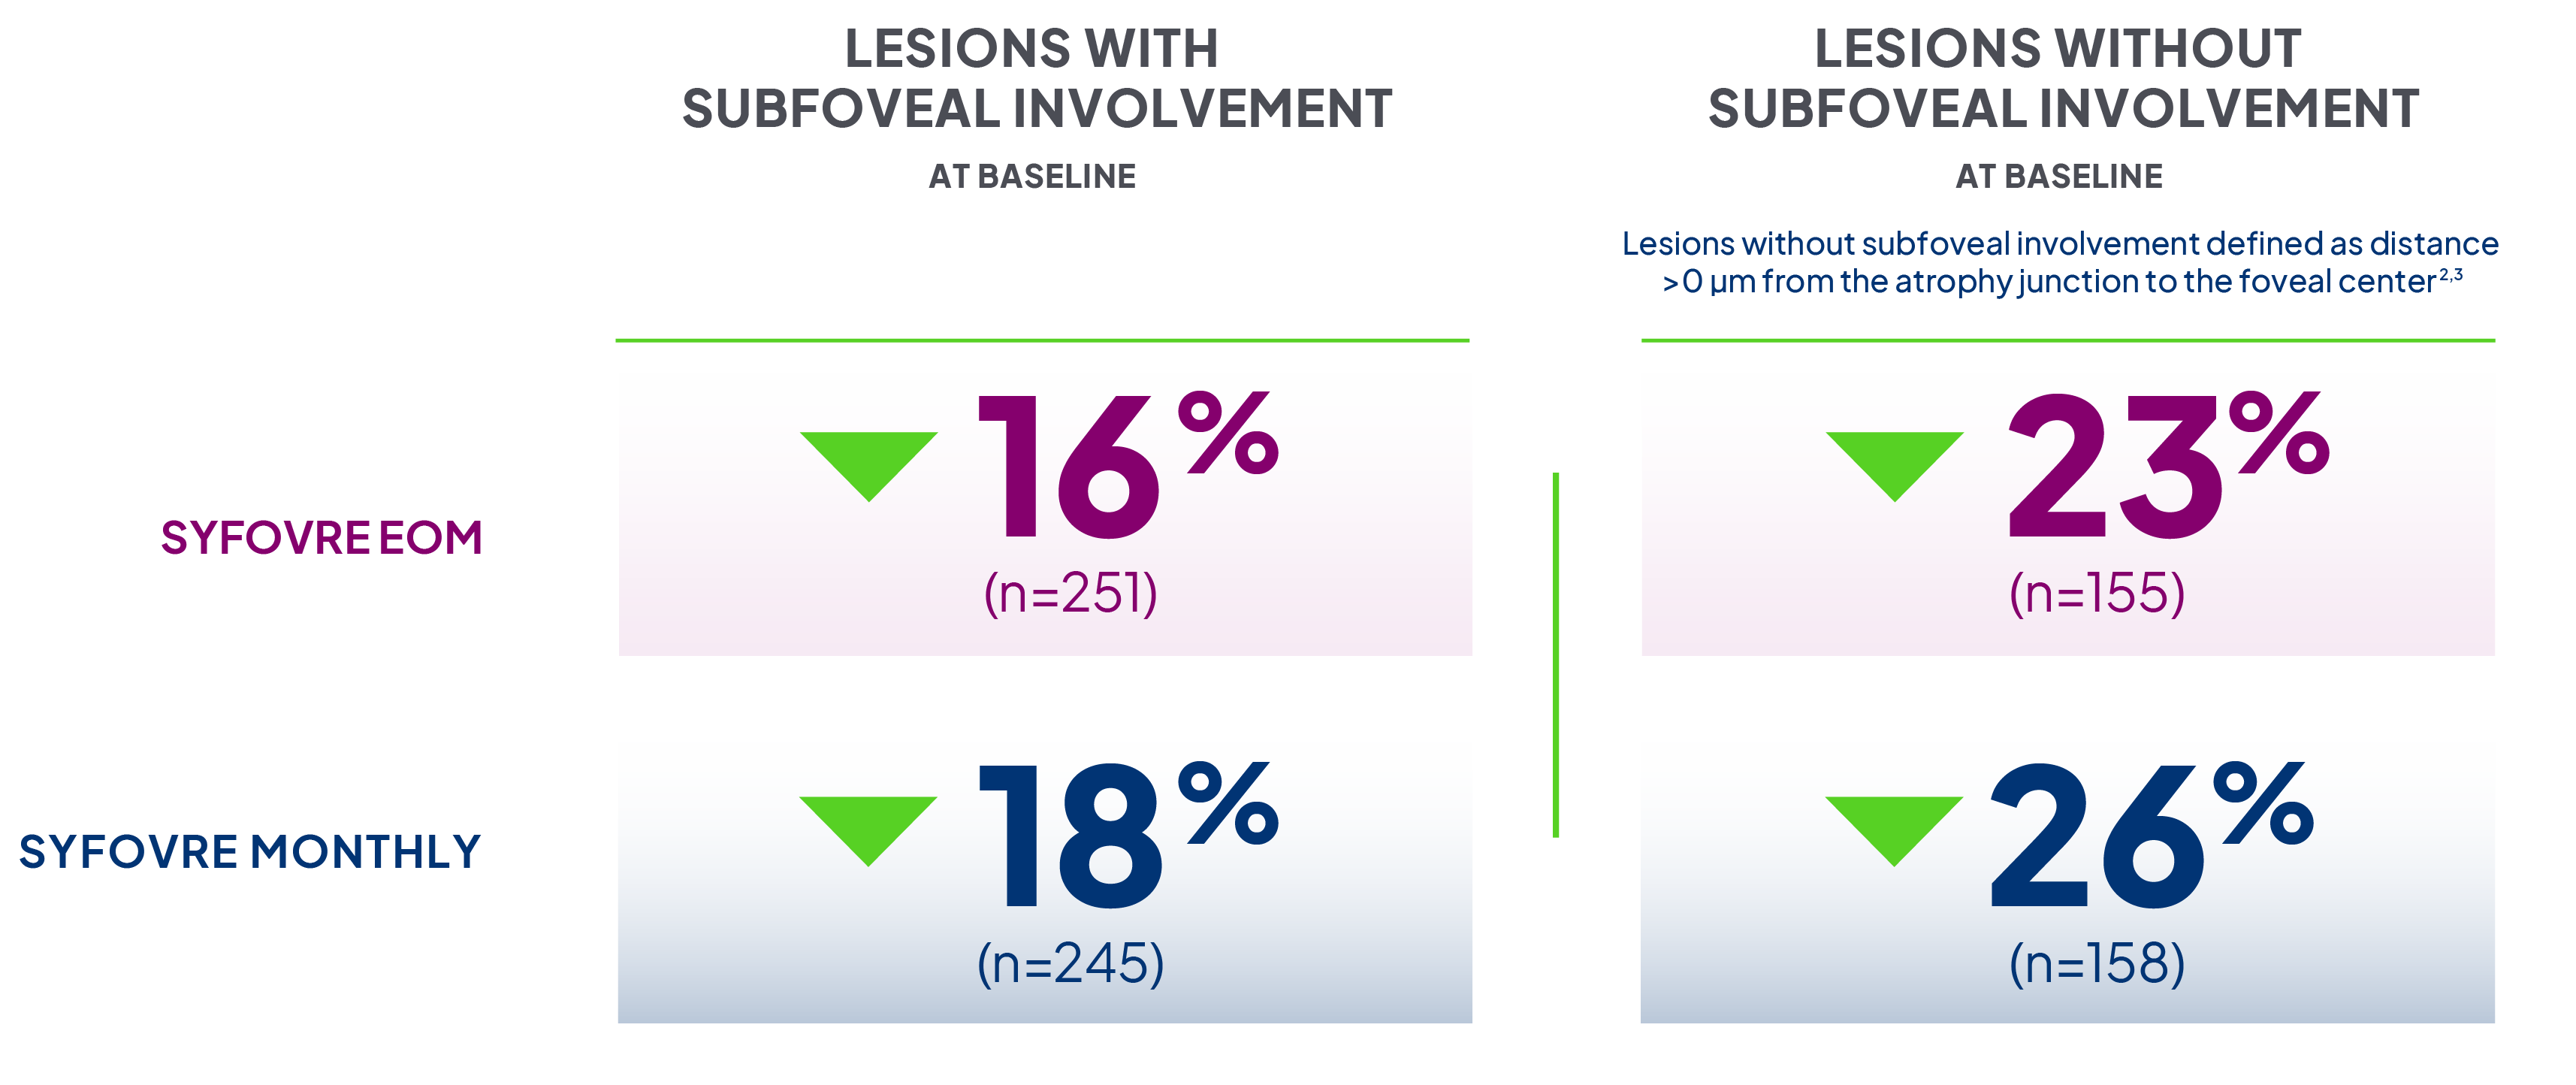 Results for lesions with and without subfoveal involvement through Month 24